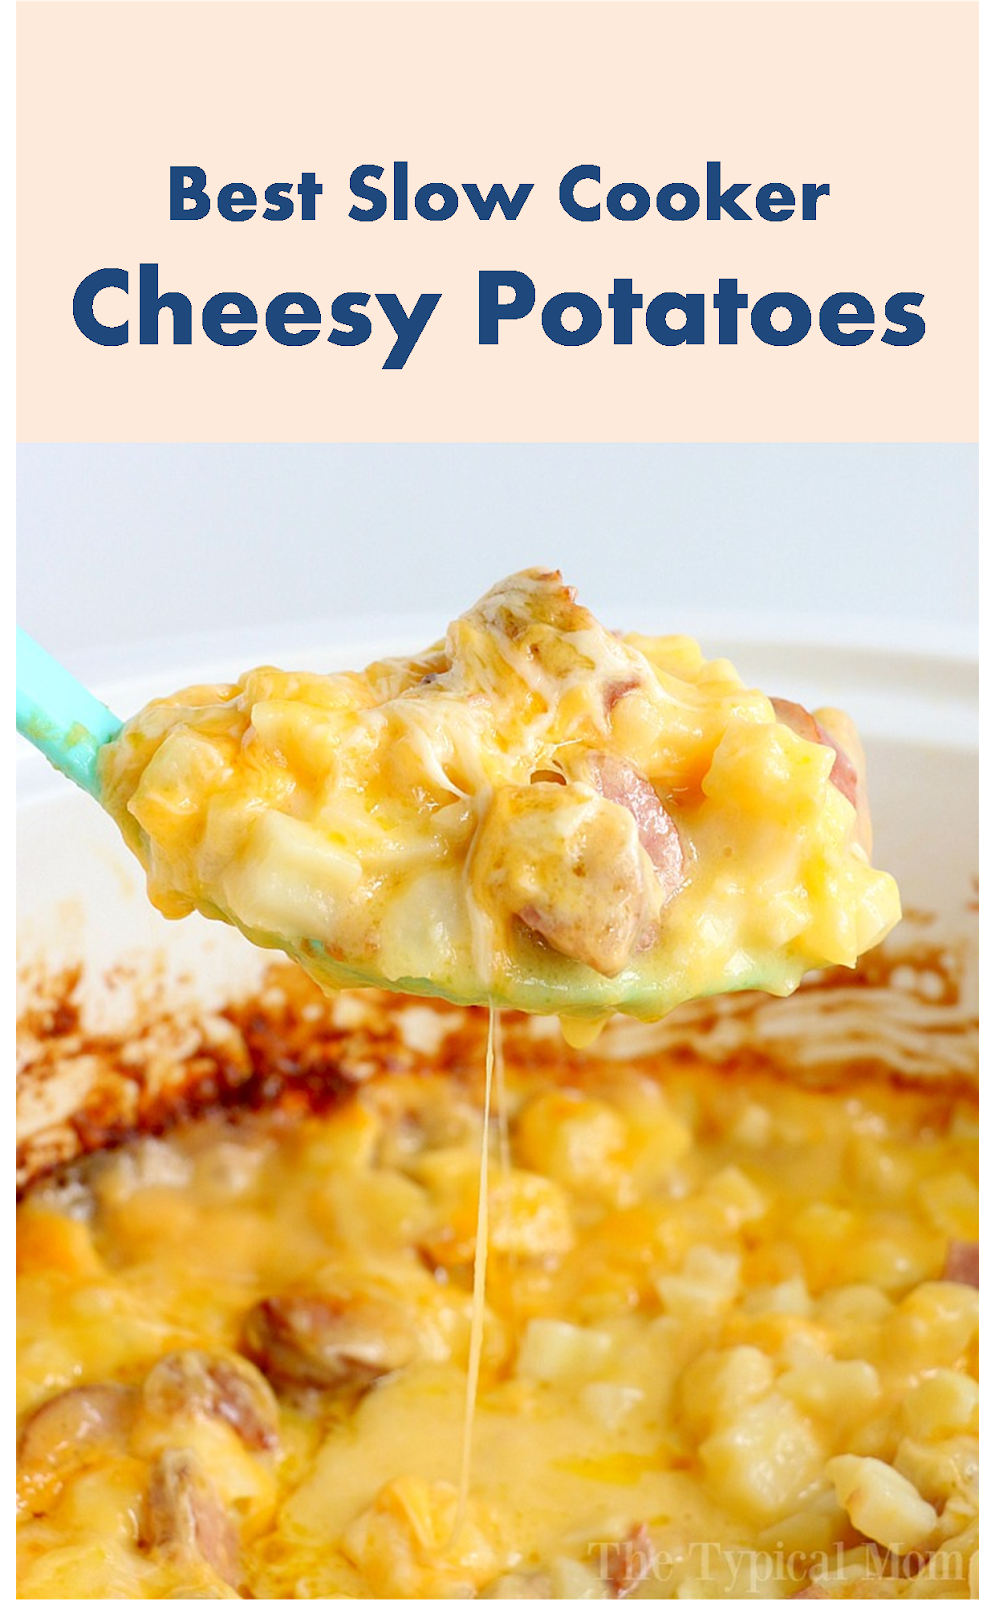 Best Slow Cooker Cheesy Potatoes | Easy Recipes